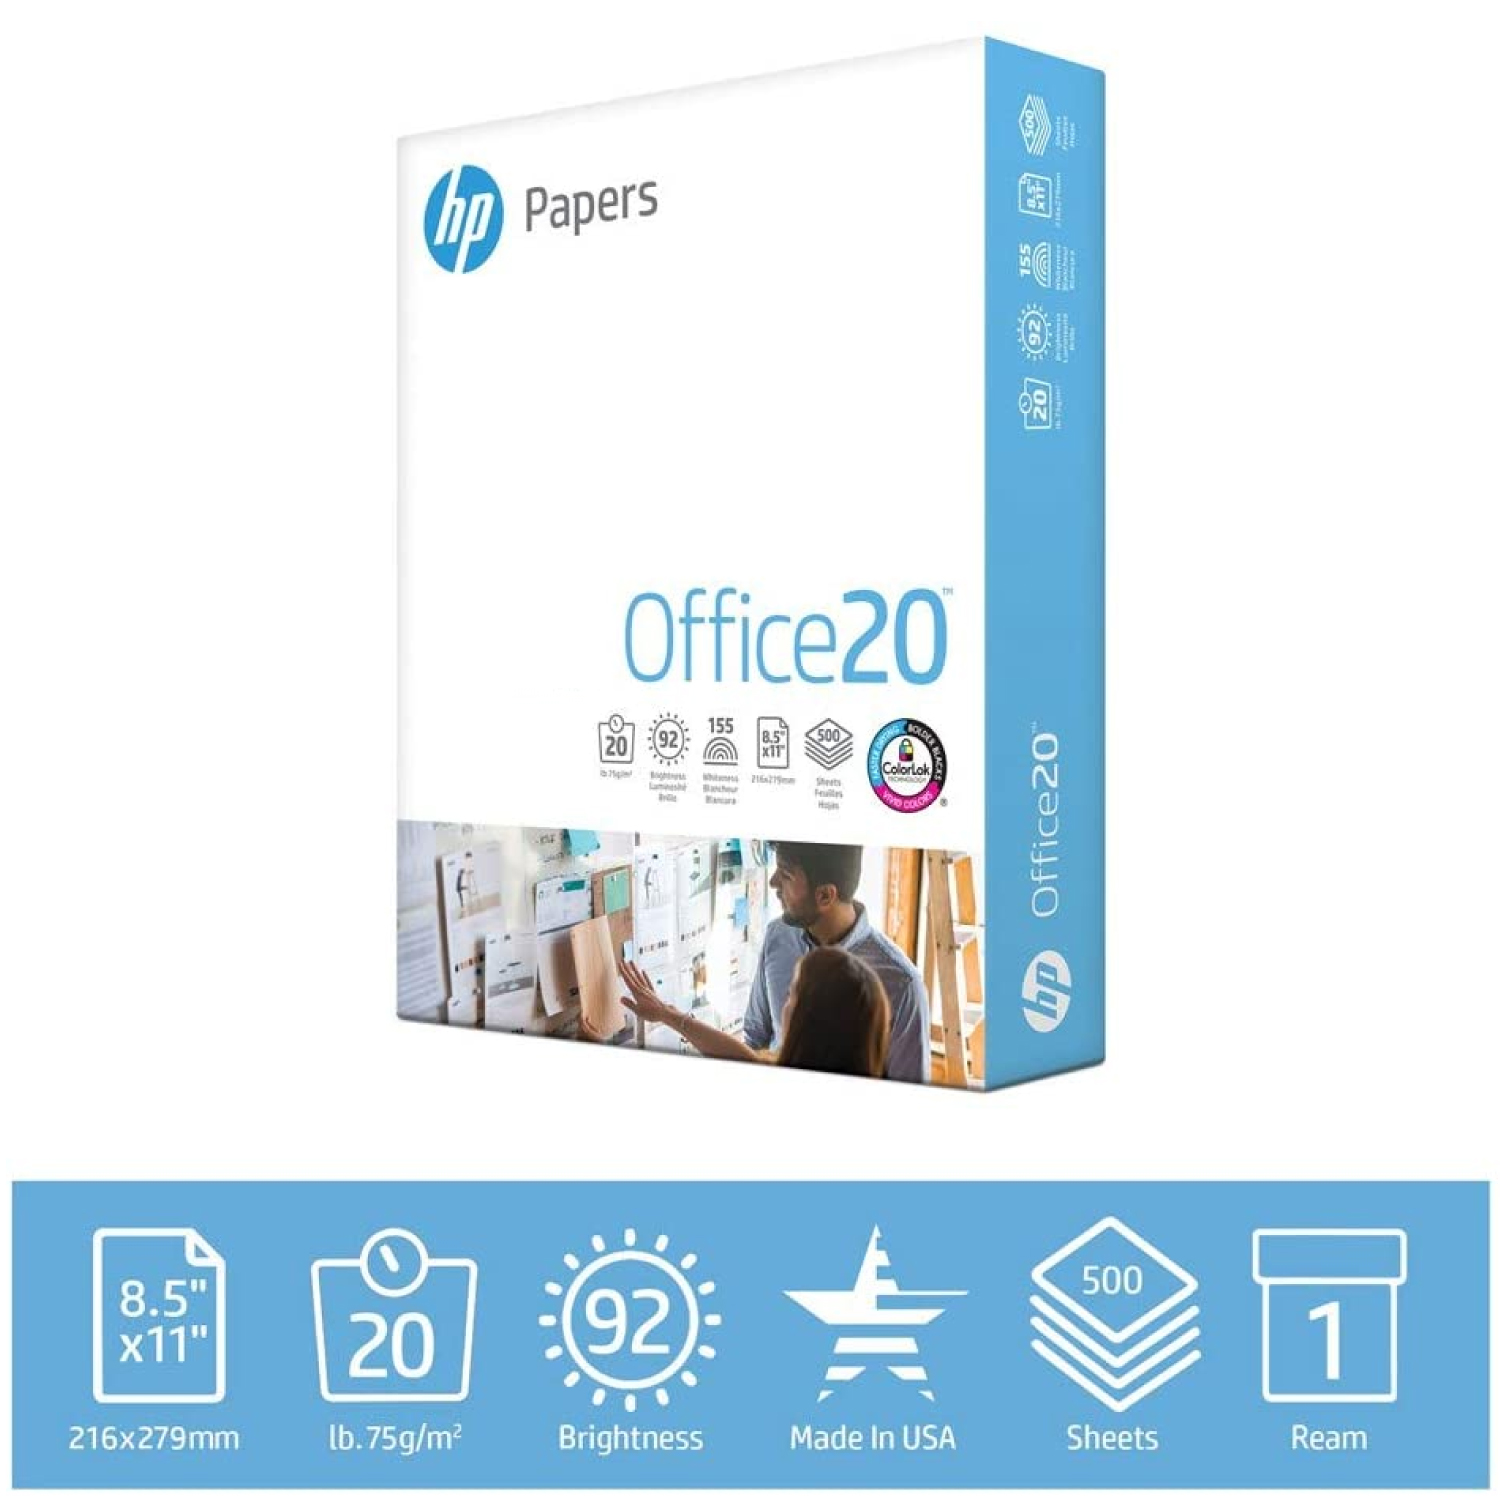 HP Printer Paper, Office 20lb, 8.5x11, 1 Ream, 500 Sheets - image 1 of 7